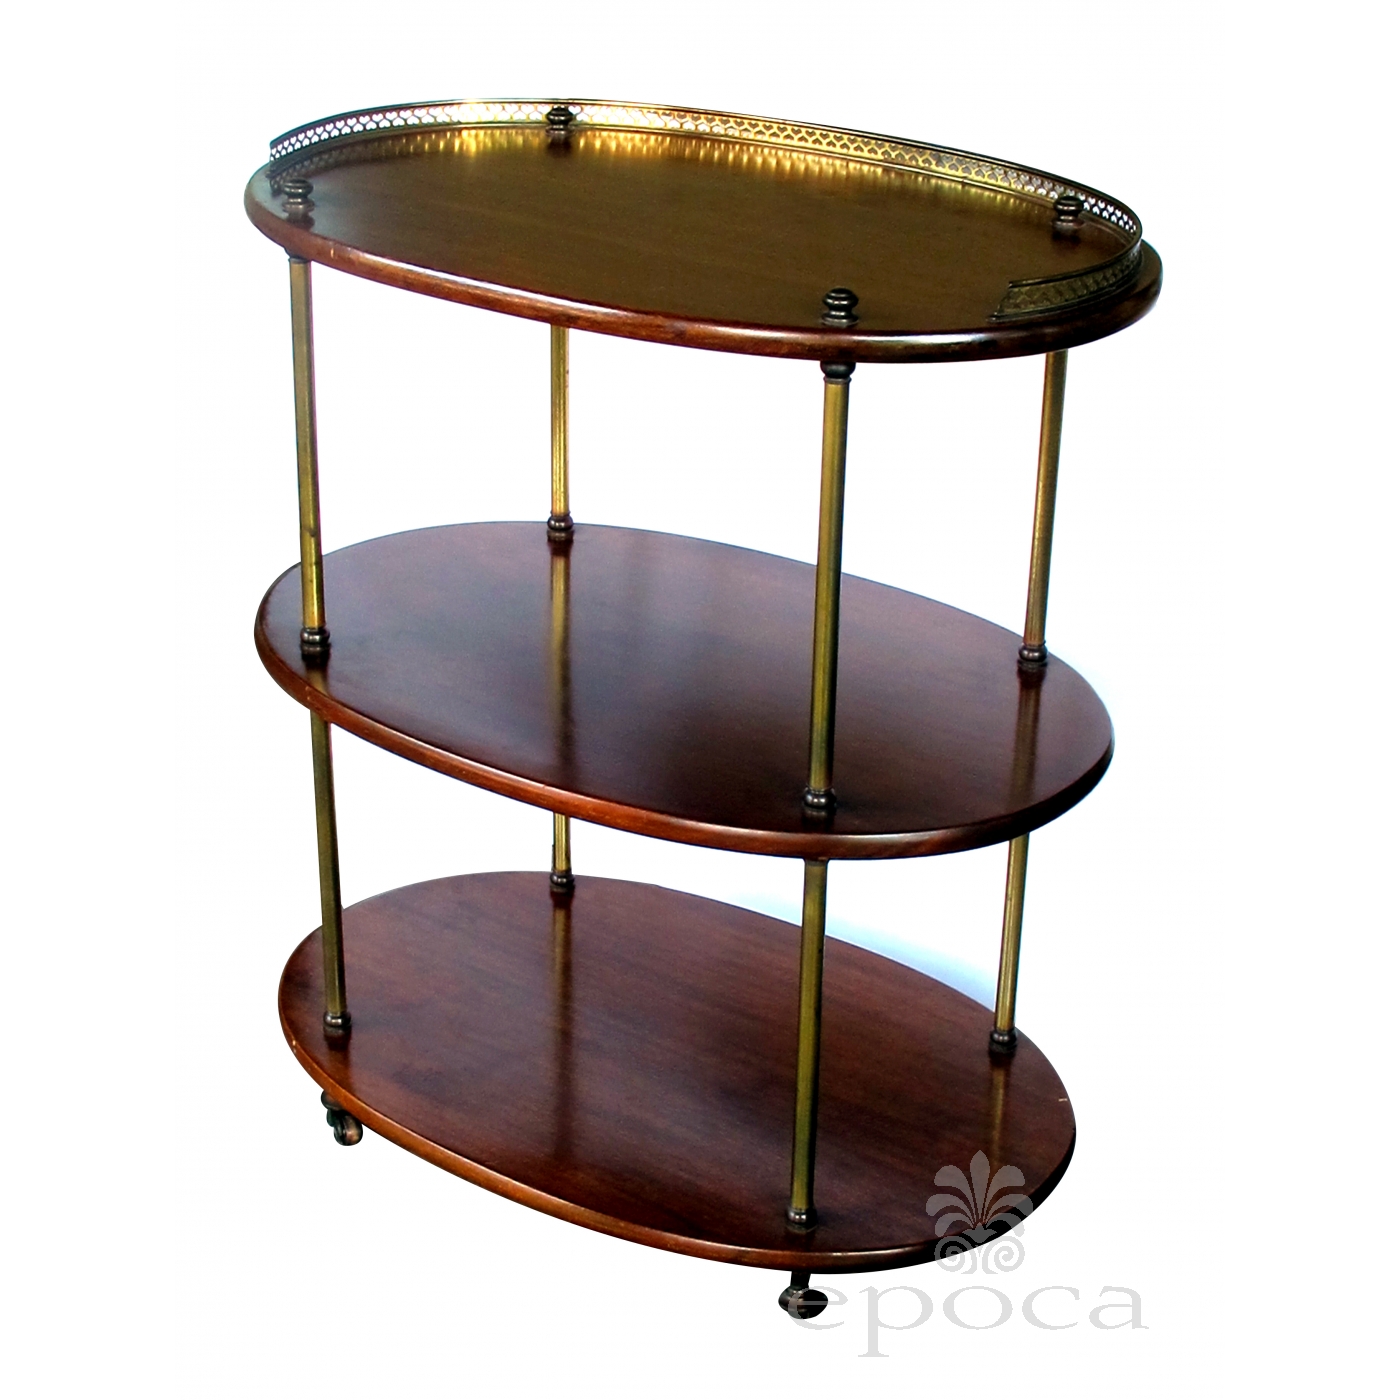 a handsome english 3-tier solid mahogany oval etagere with brass mounts  epoca antiques & 20th century furnishings san francisco